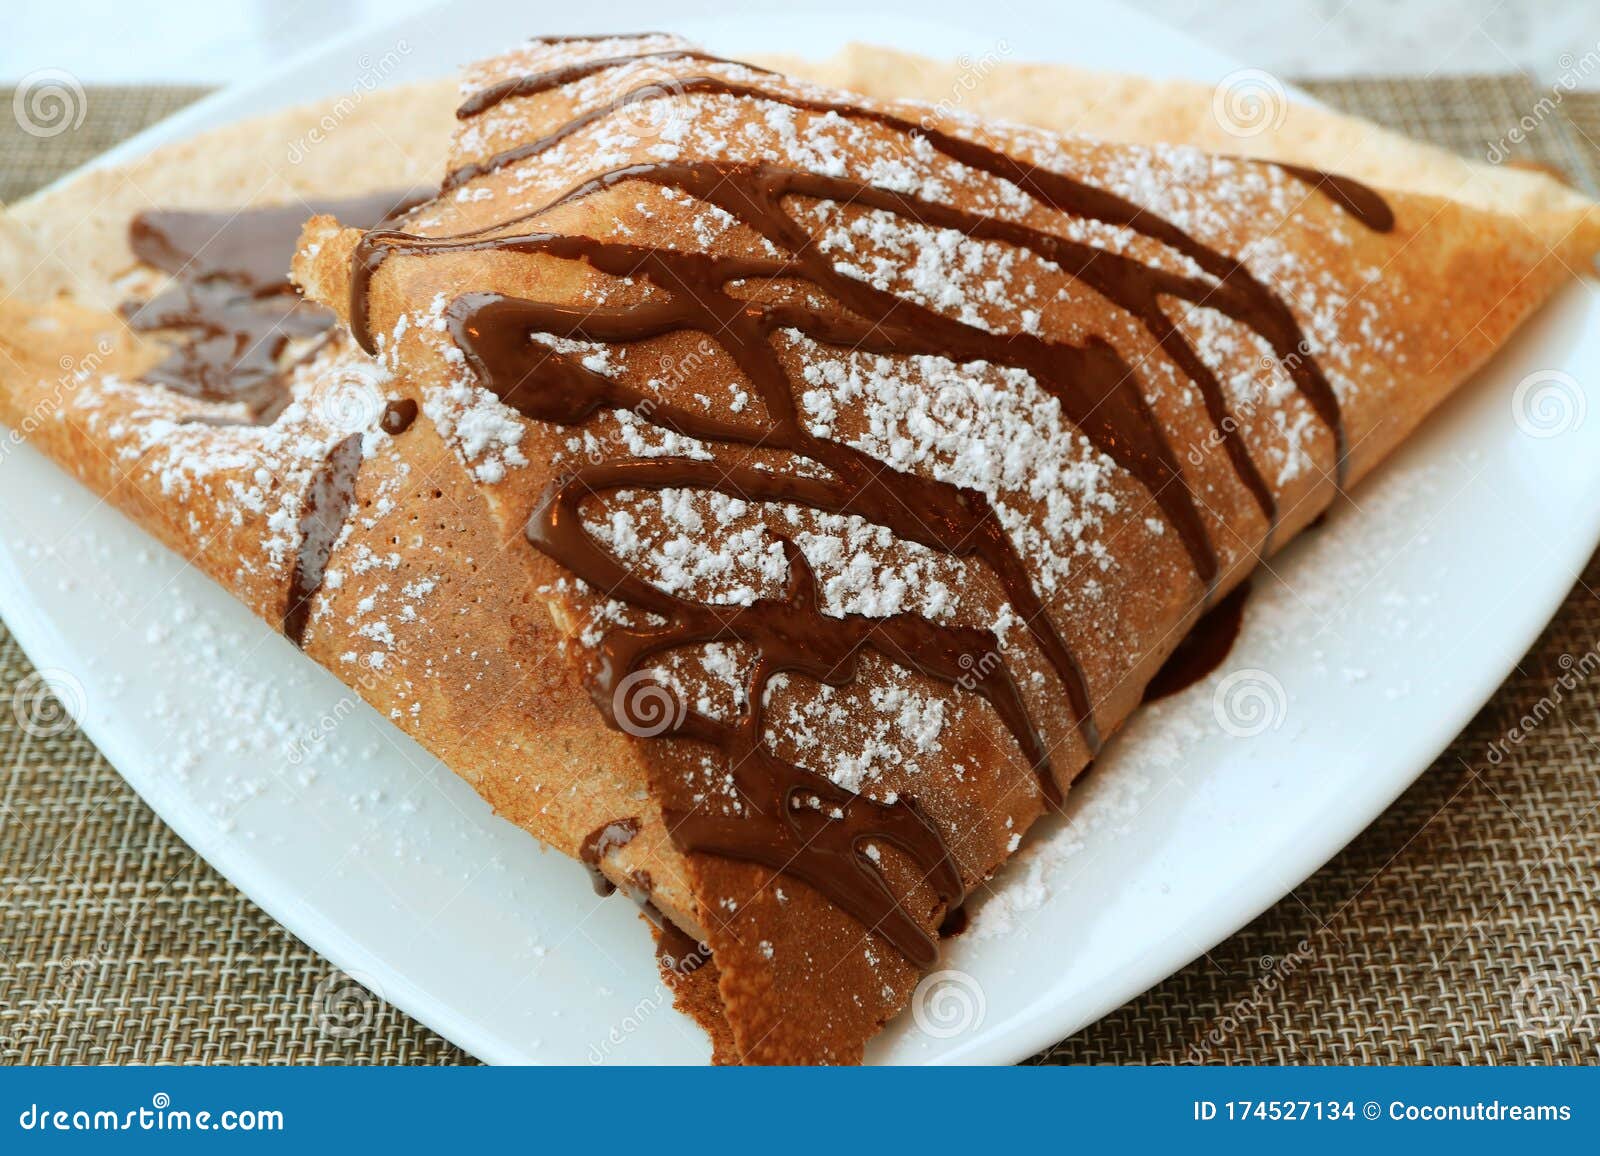 plate of mouthwatering french crepe with chocolate sauce and icing sugar